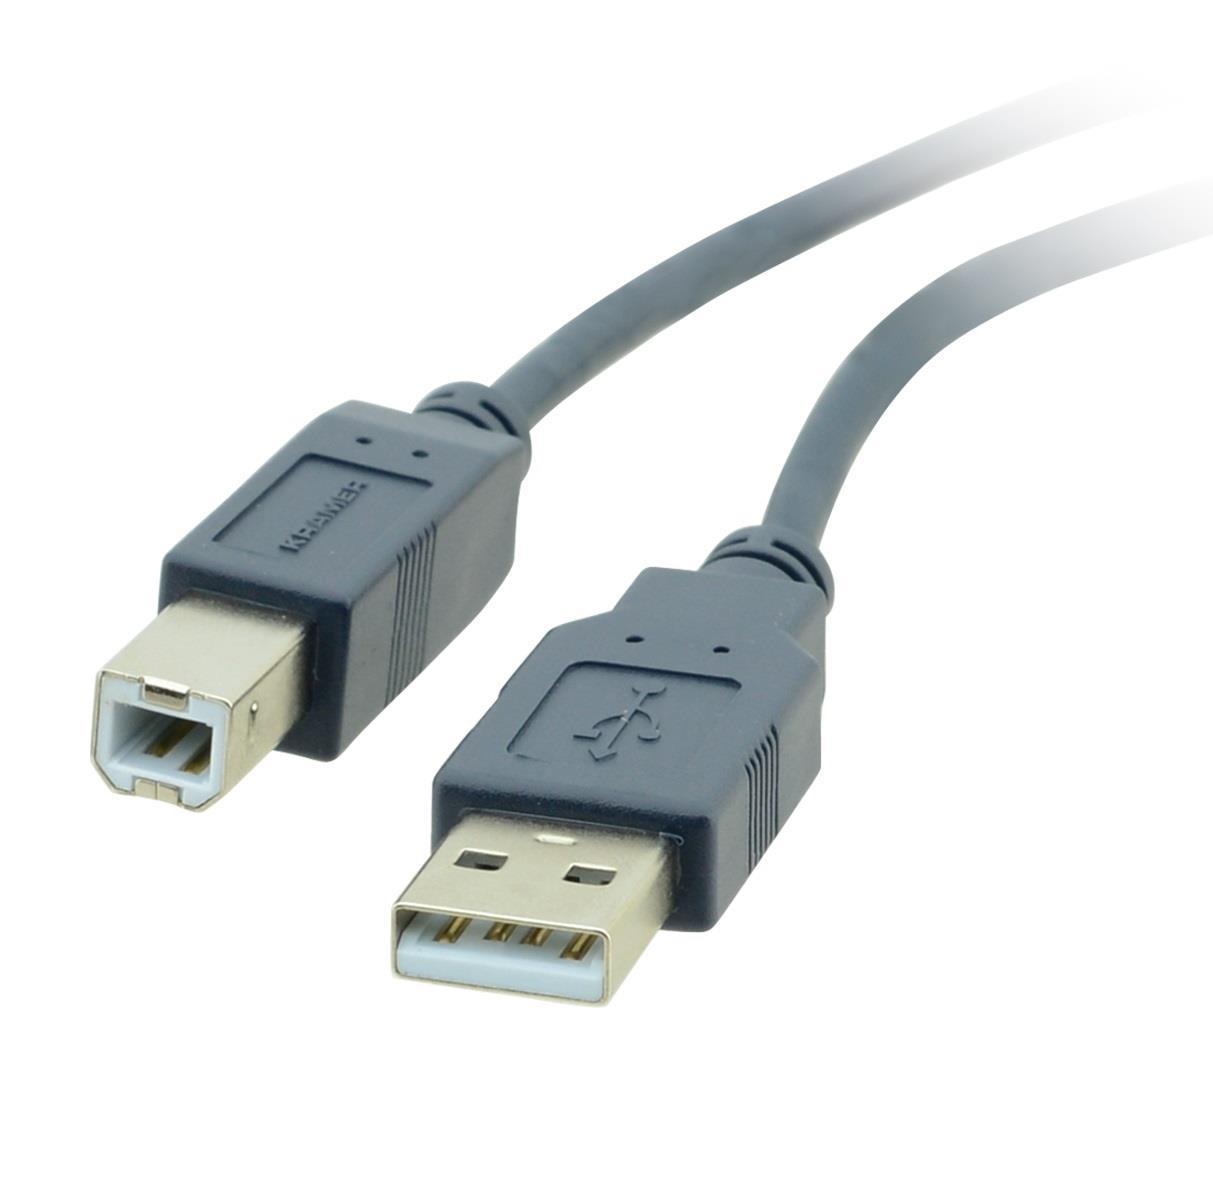 KRAMER C-USB/AB-10 USB 2.0 A(M) TO B(M) CABLE-10FT 3M